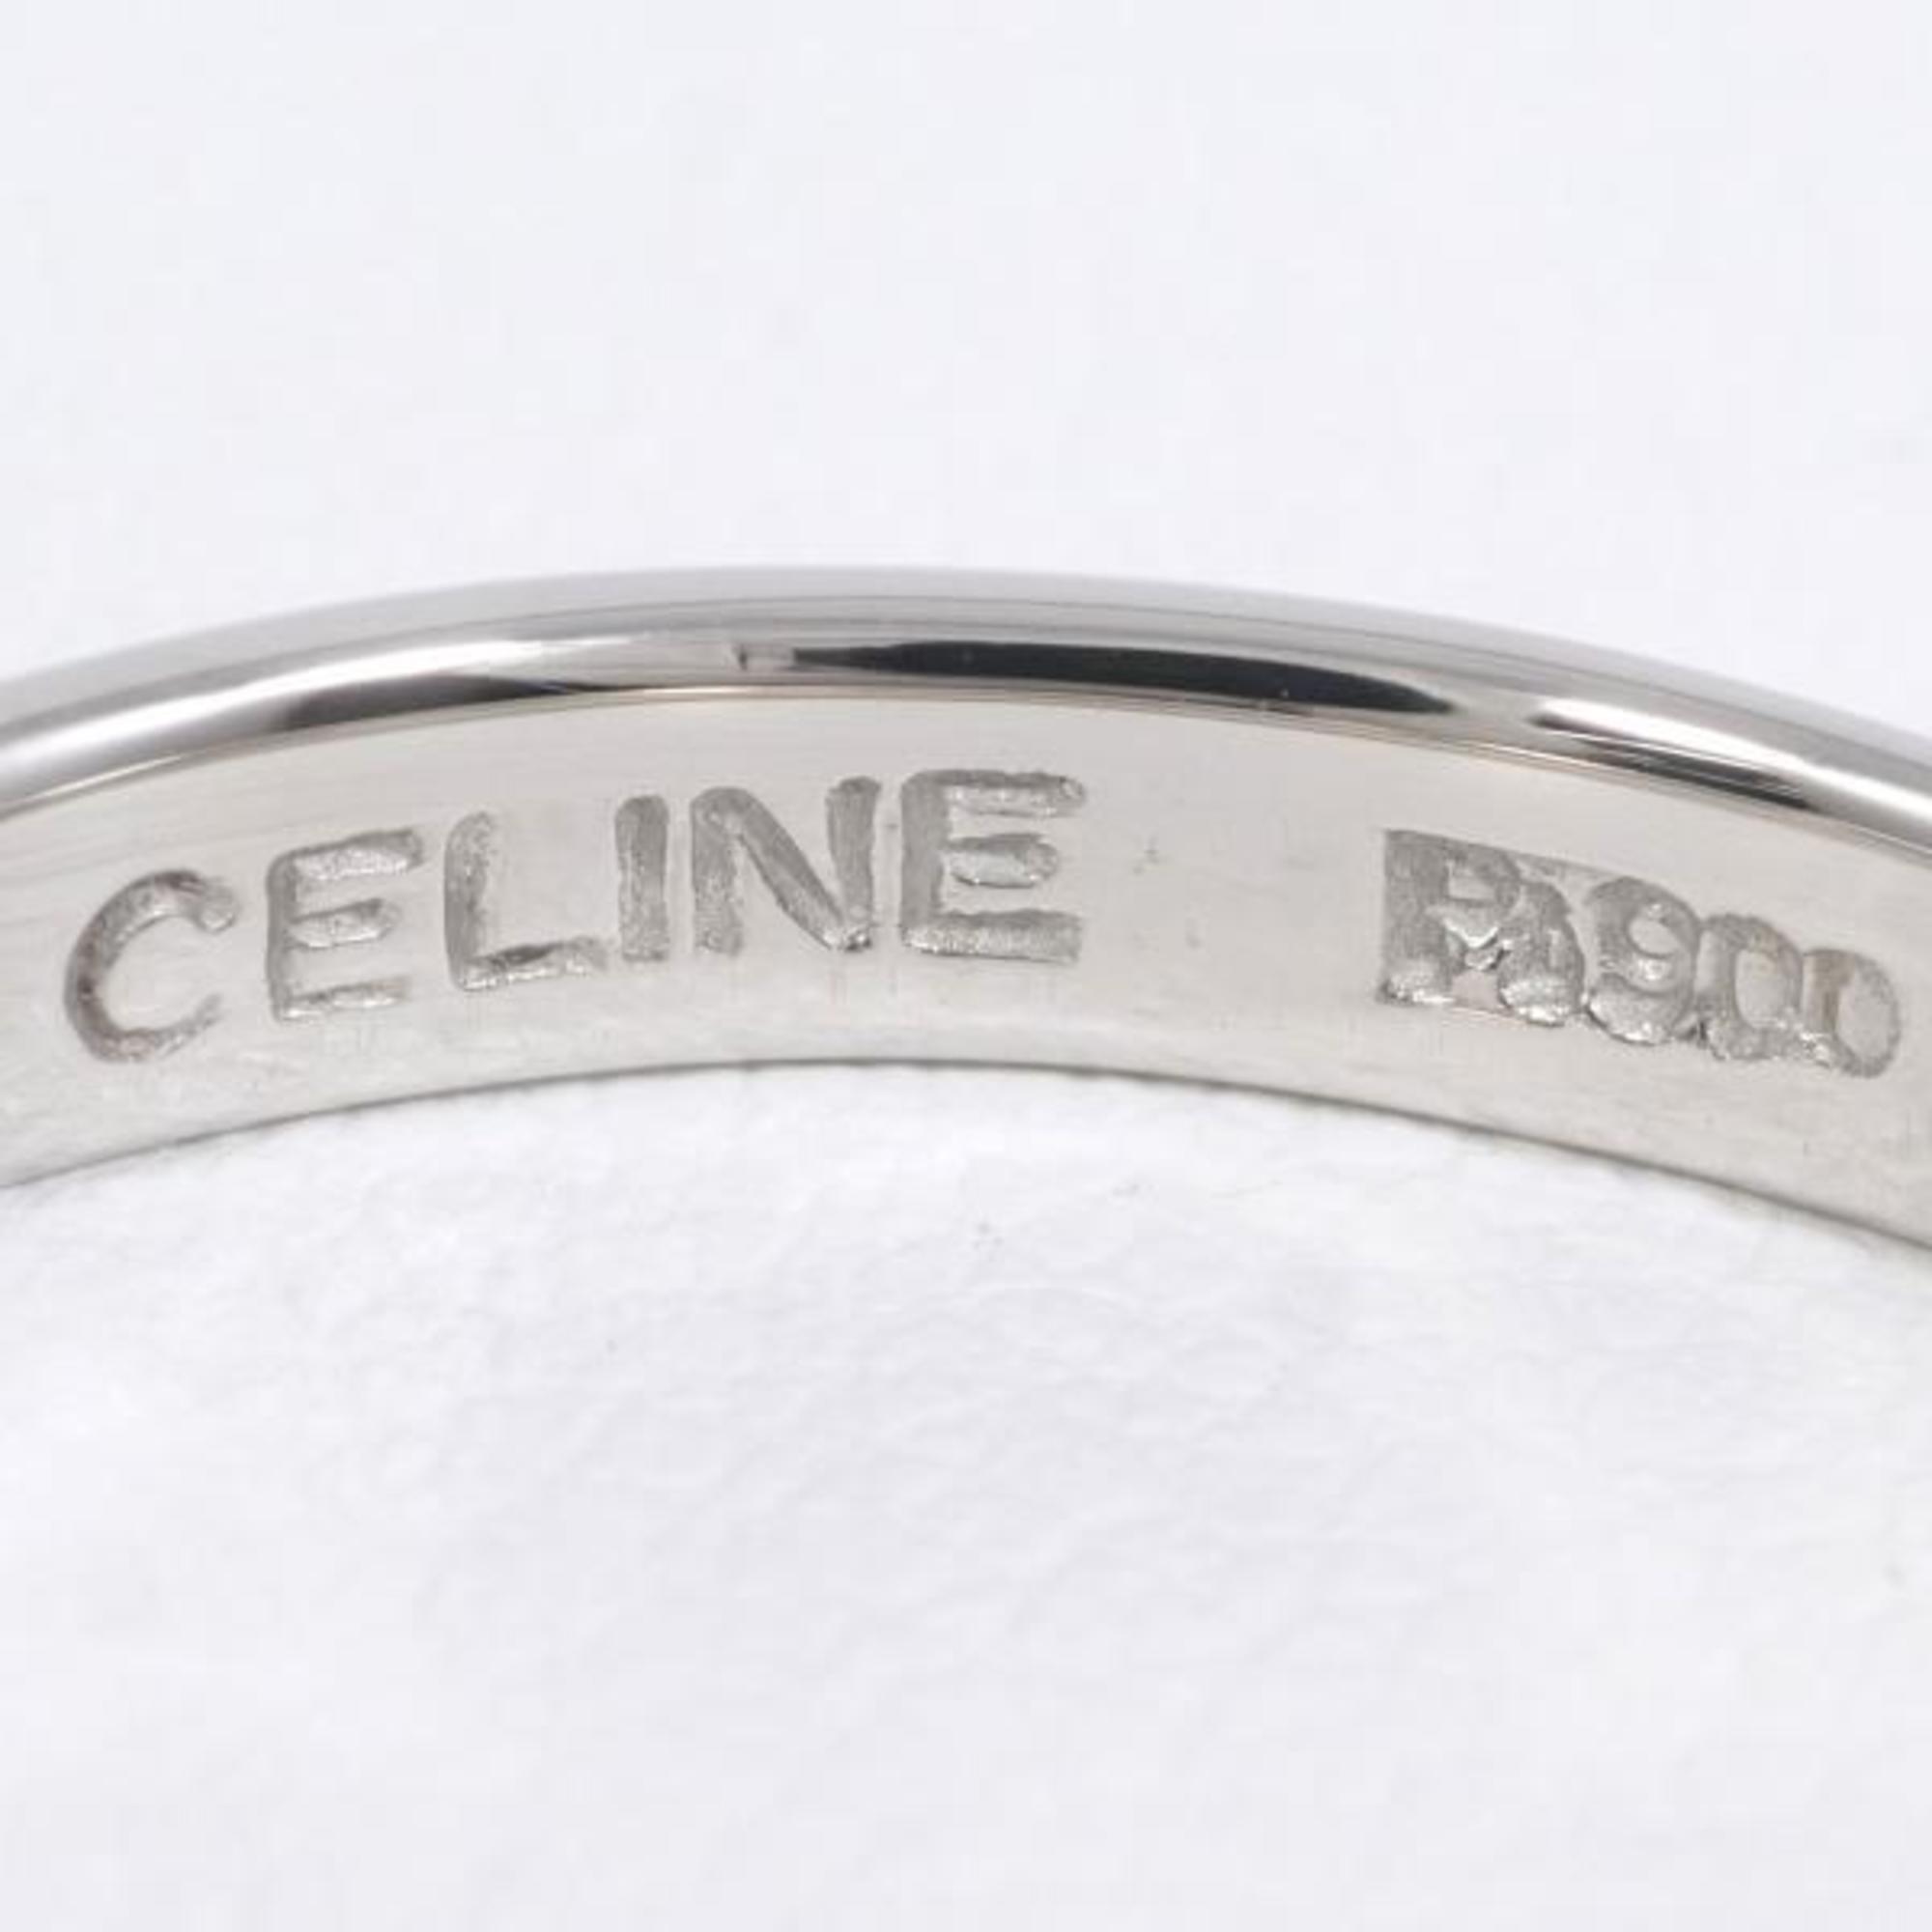 Celine PT900 Ring No. 13 Total Weight Approx. 3.4g Jewelry